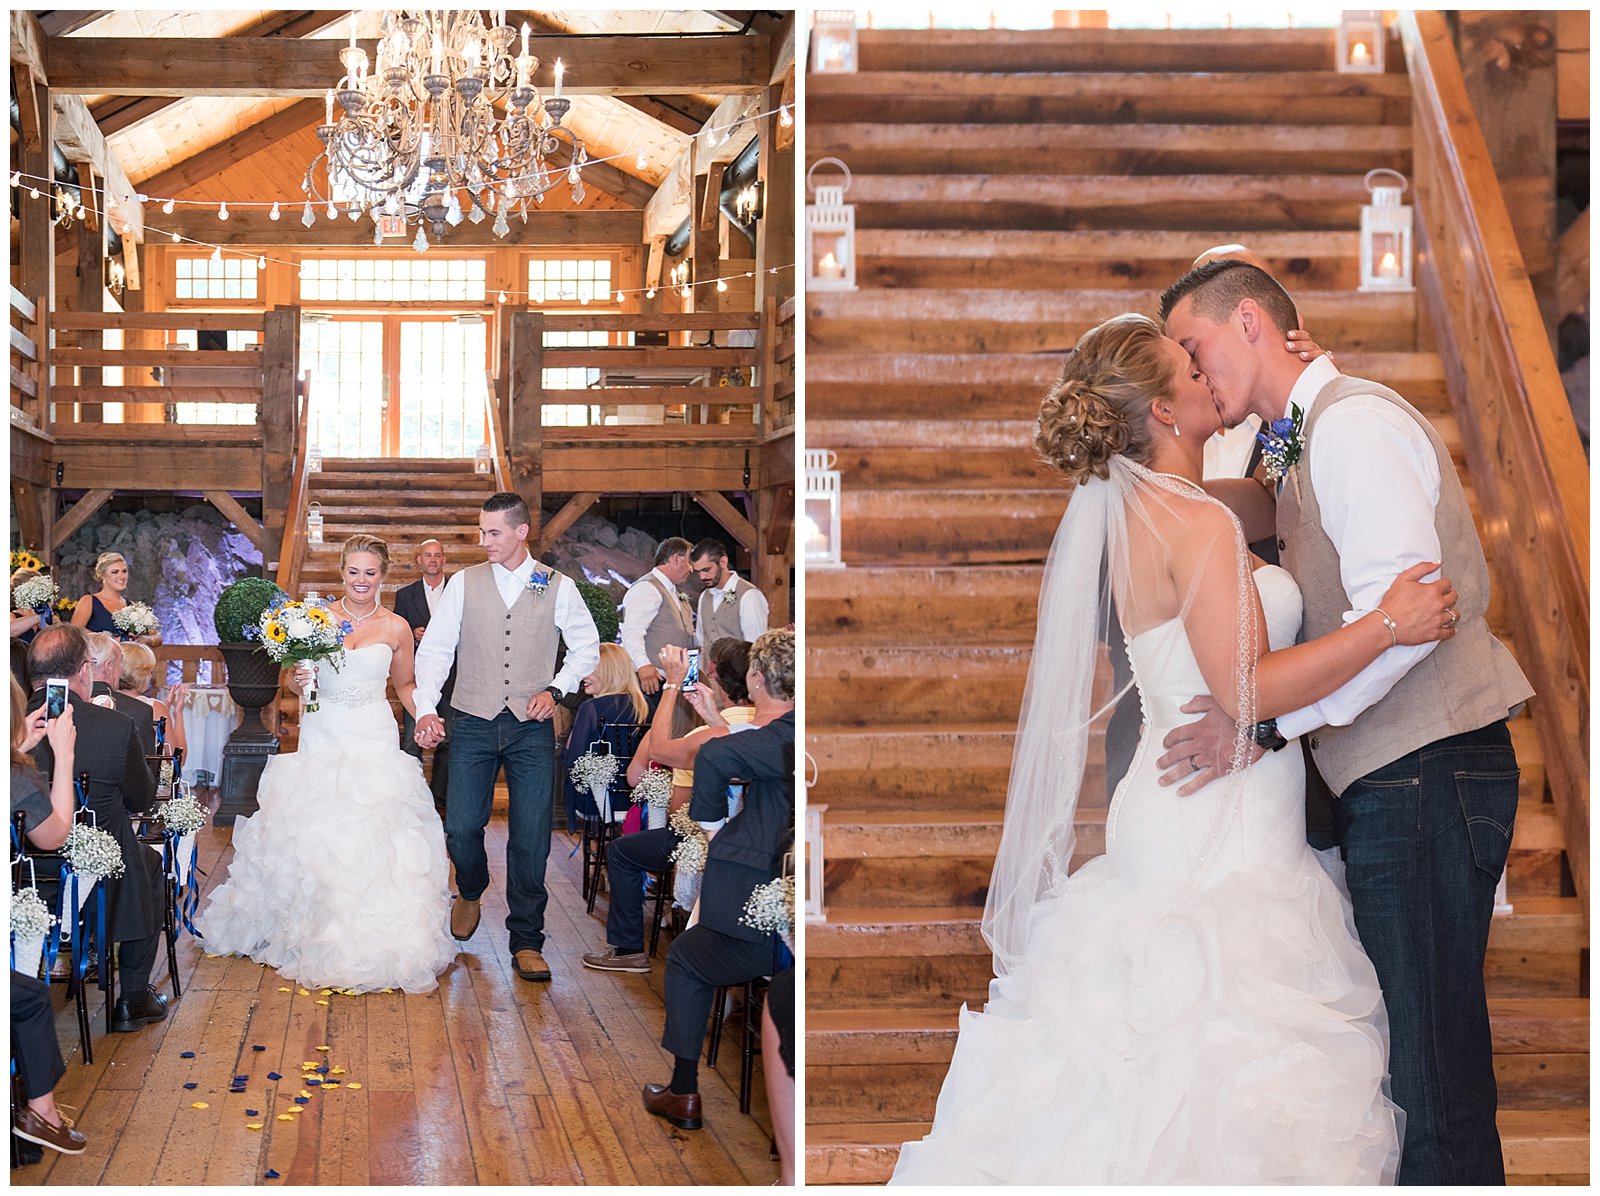 A beautiful barn wedding ceremony at the red lion inn